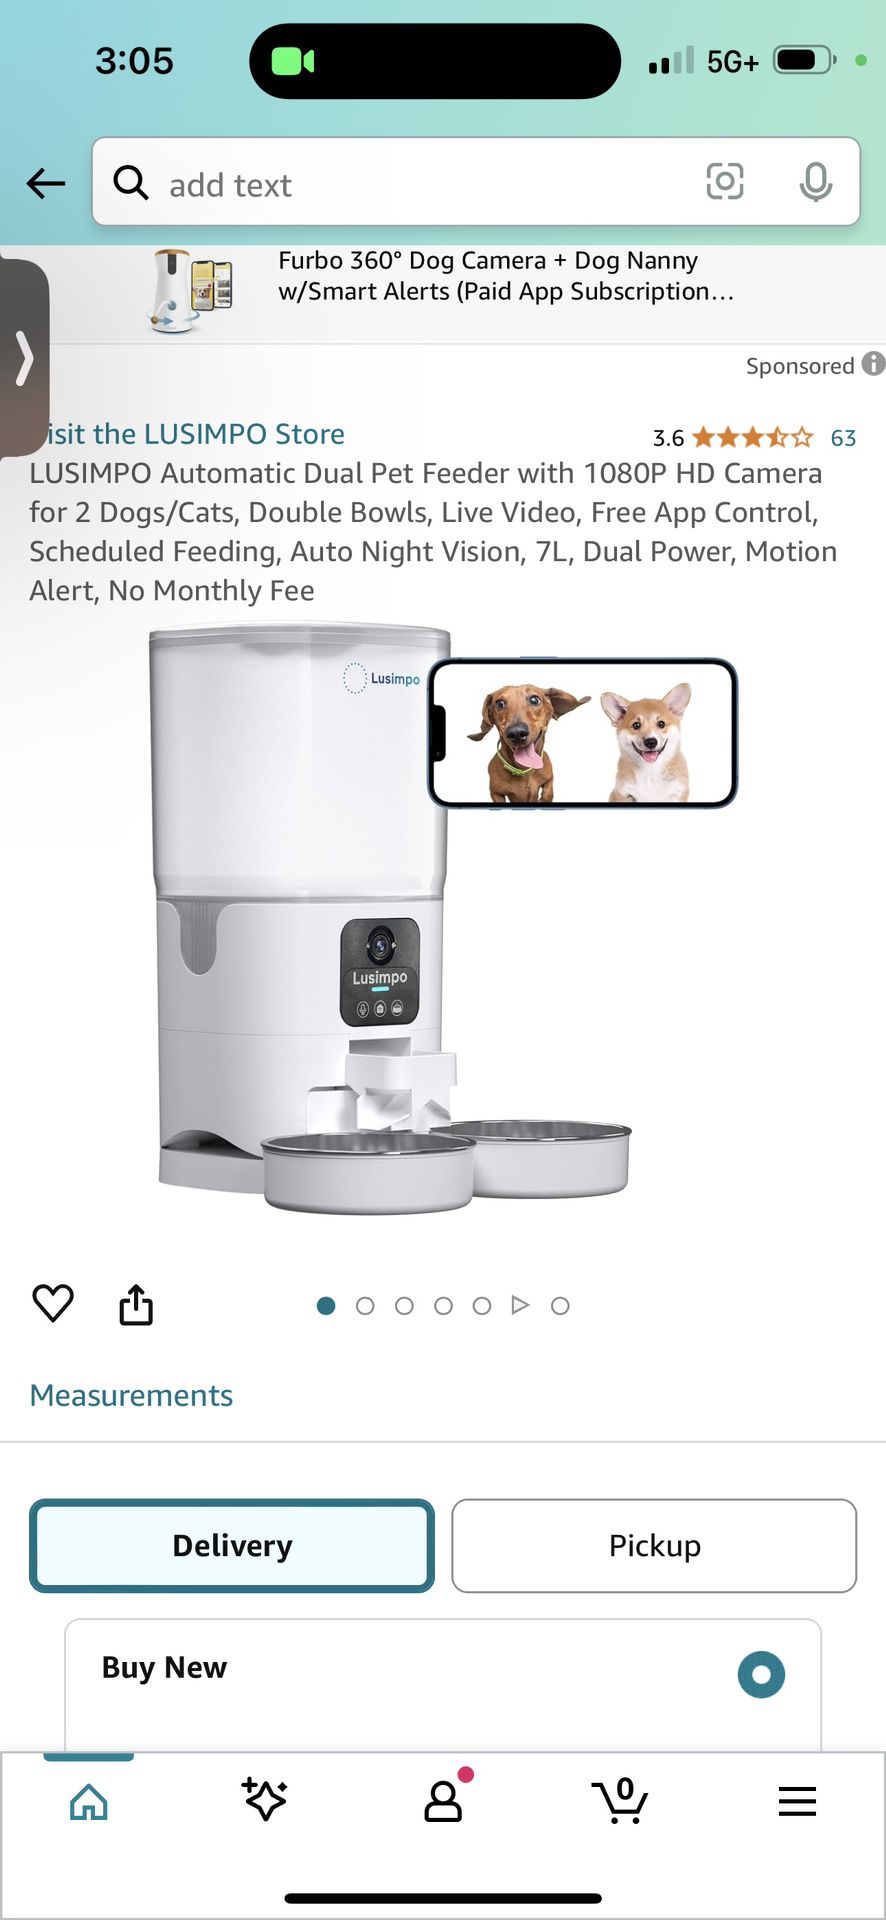 Automatic Dual Pet Feeder with 1080P HD Camera